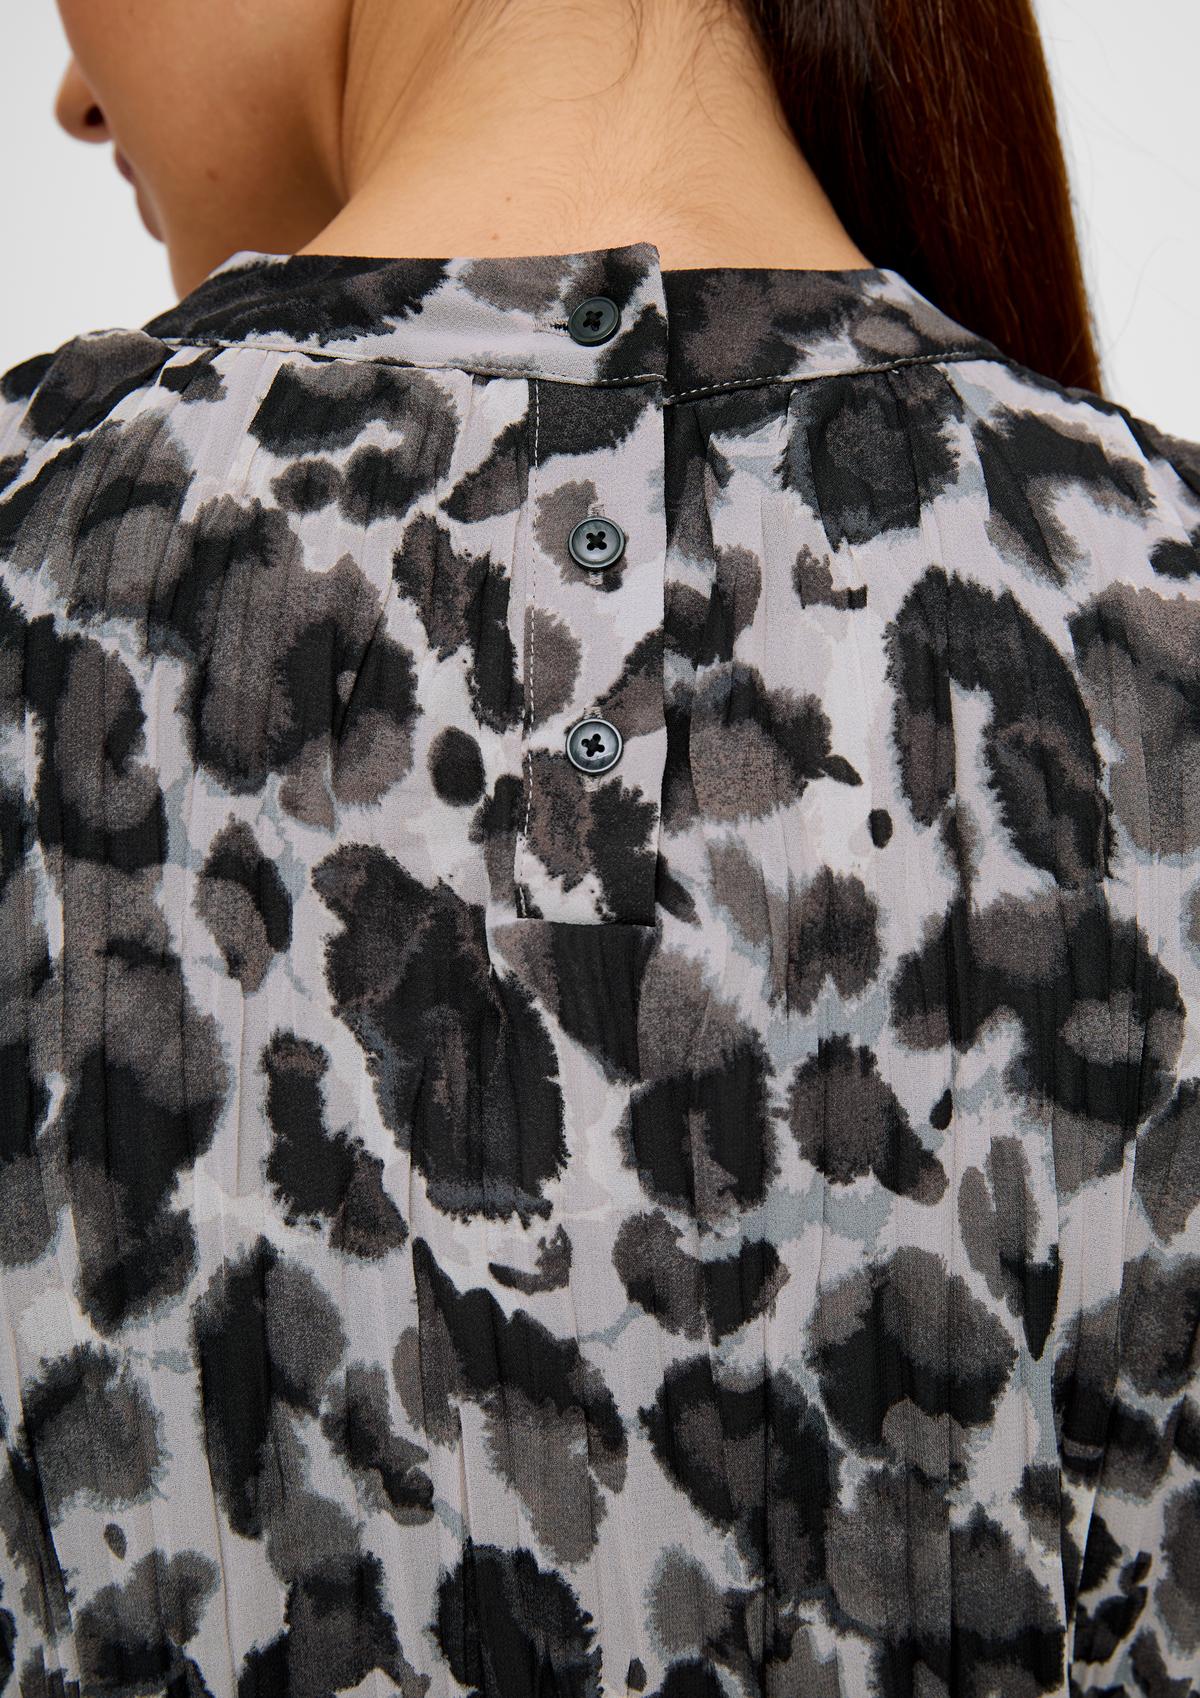 s.Oliver Patterned chiffon blouse with a band collar